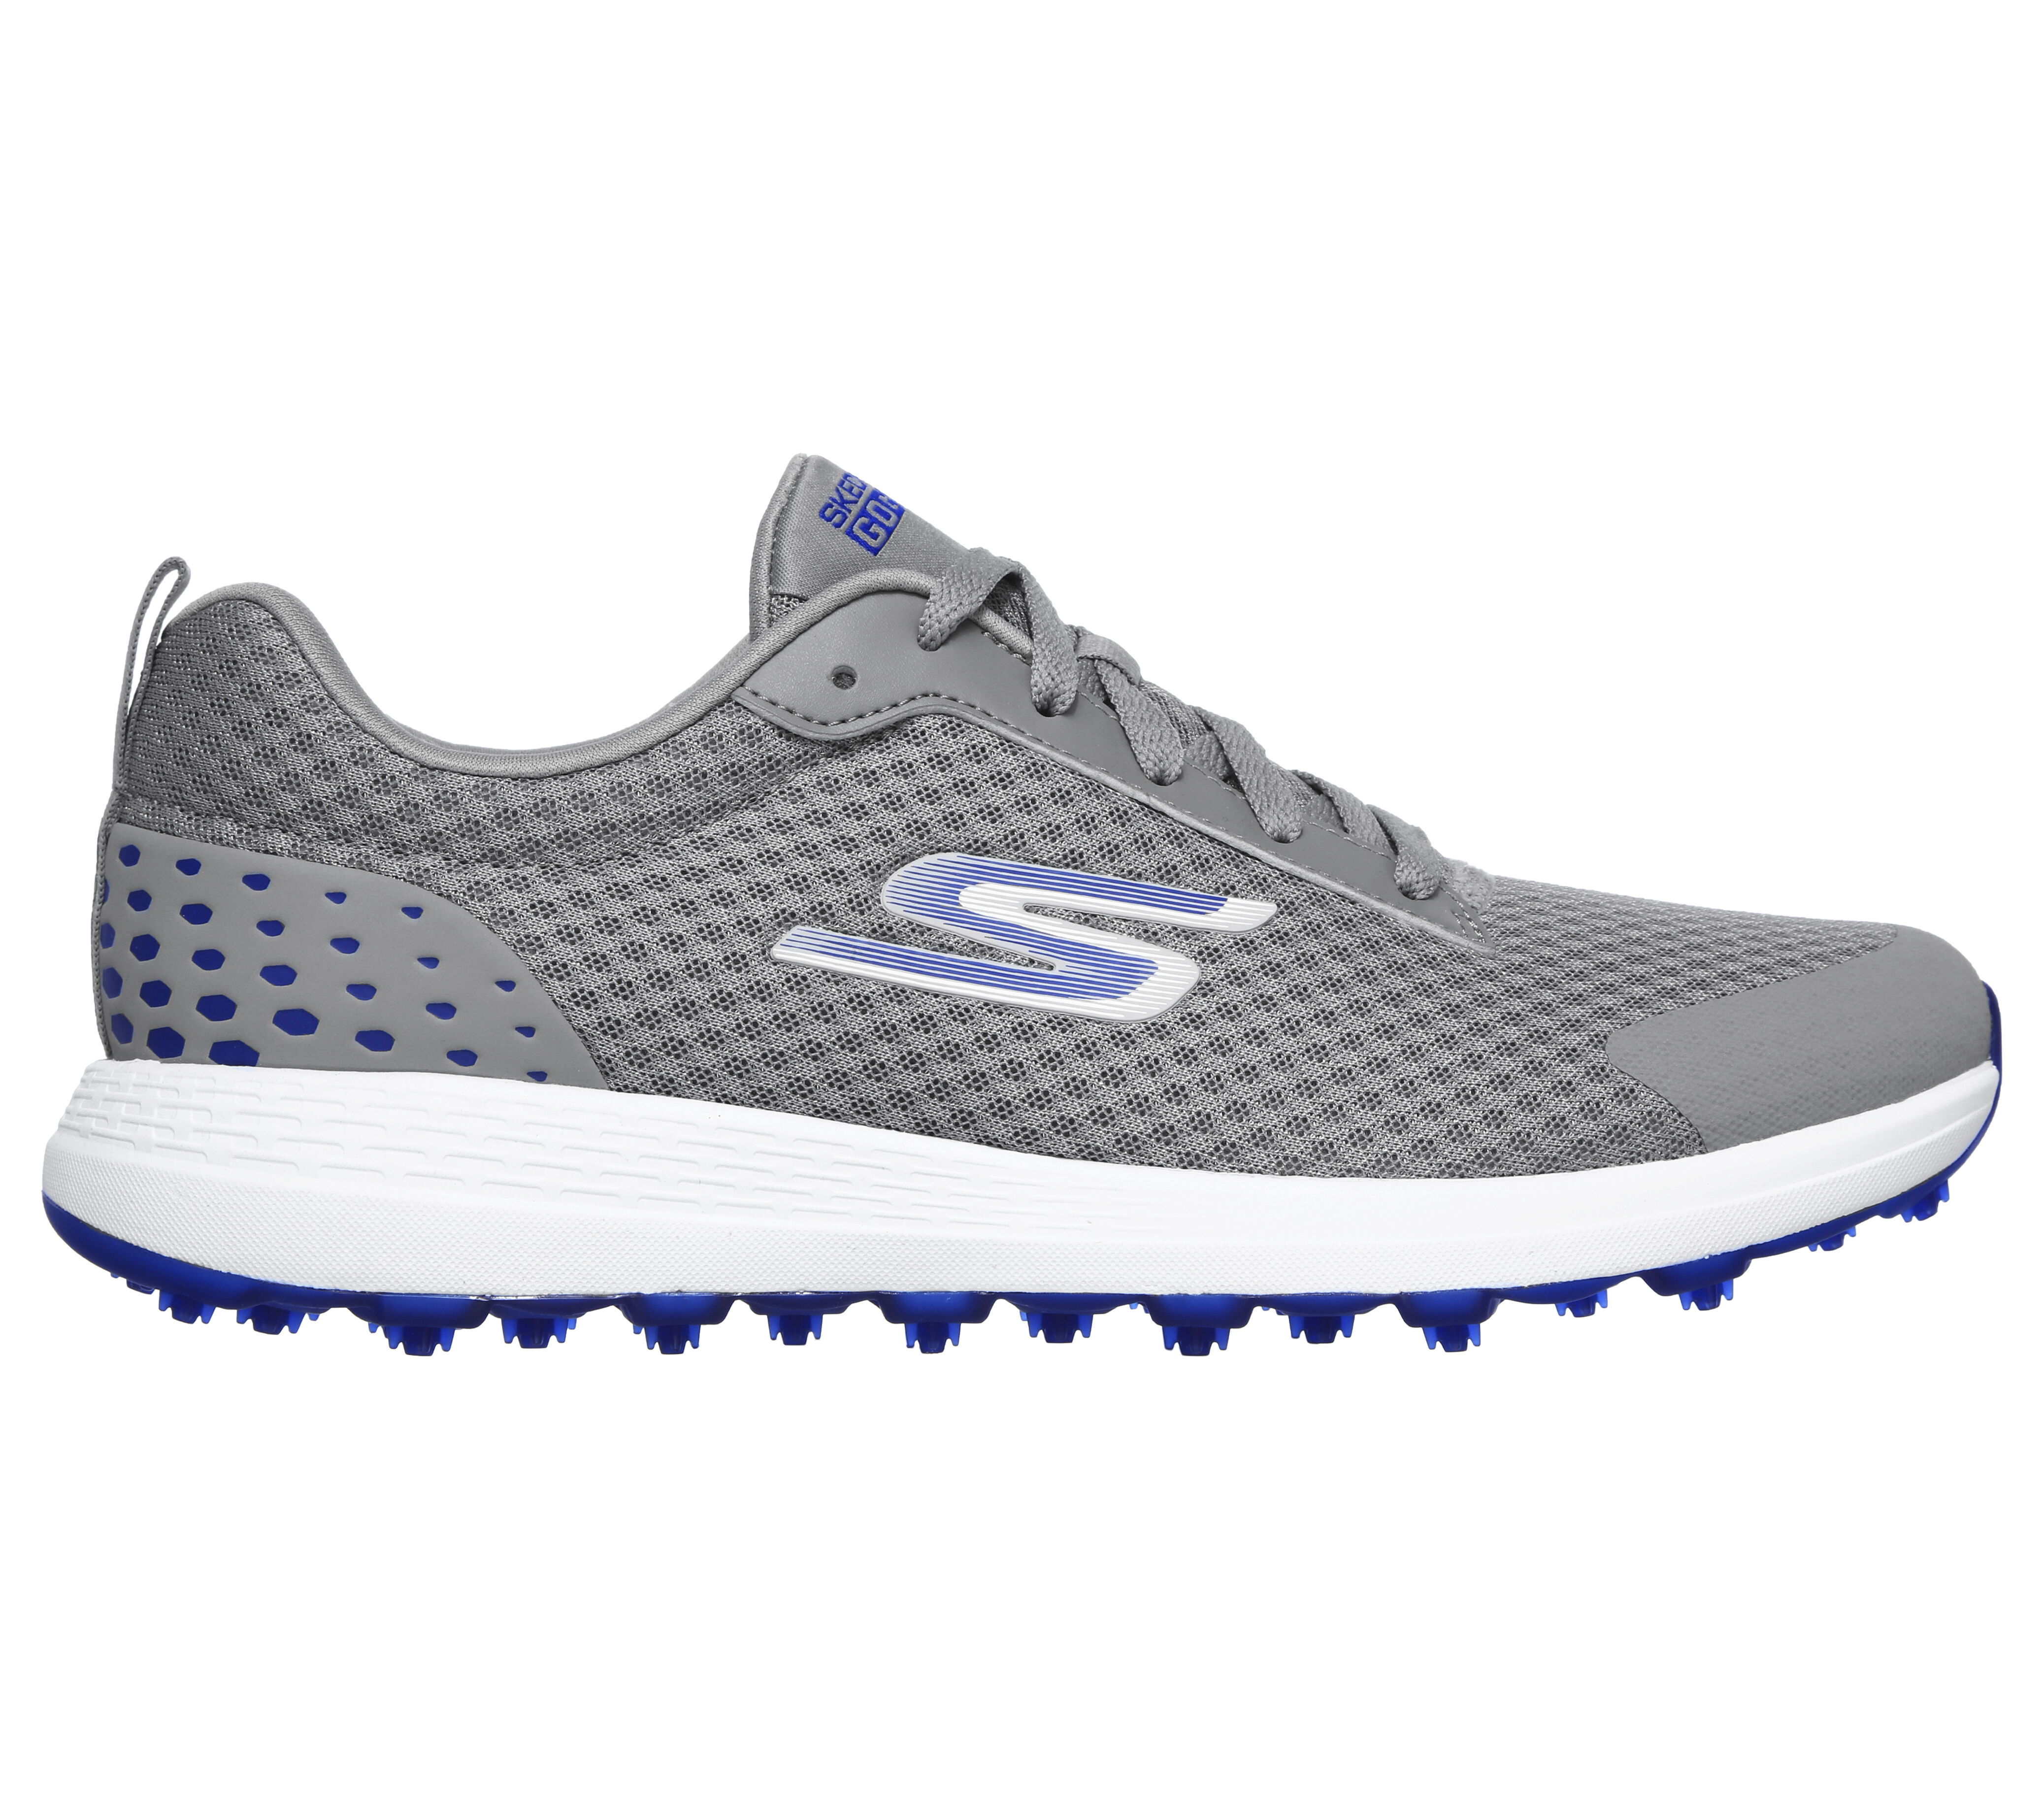 se Zorom skechers extra wide golf shoes 